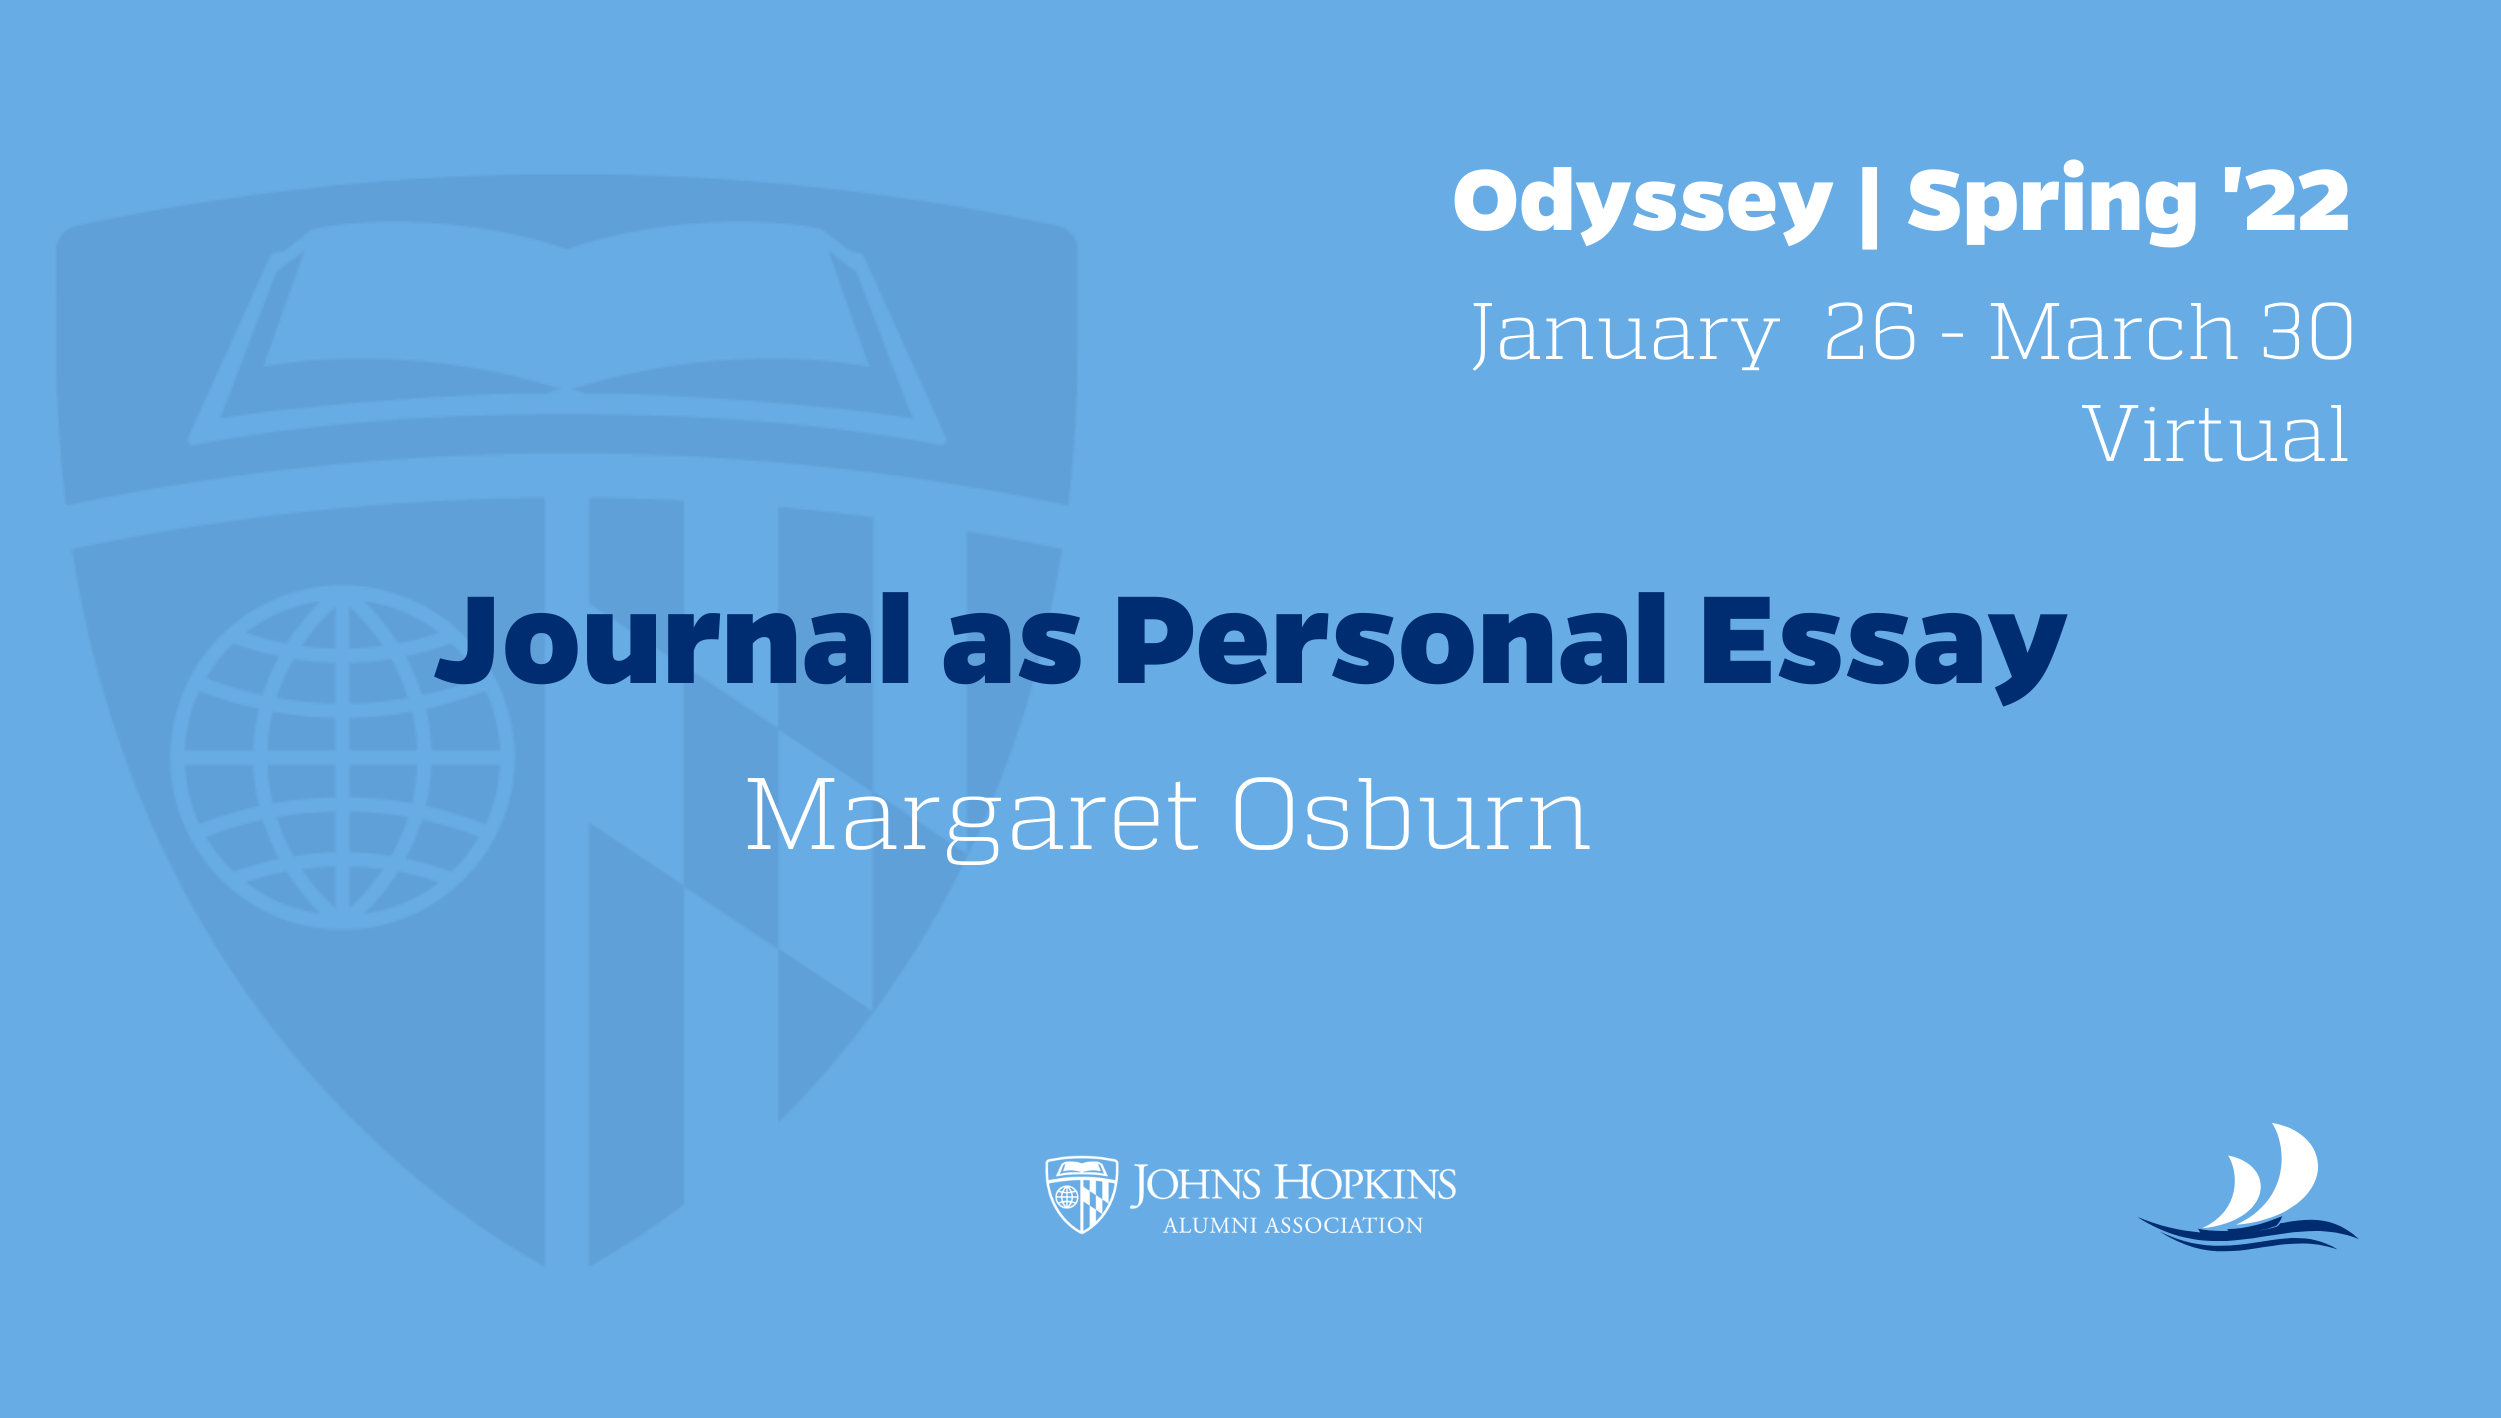 Odyssey title on dark blue background featuring the alumni association logo. Course title - journal as a personal essay.